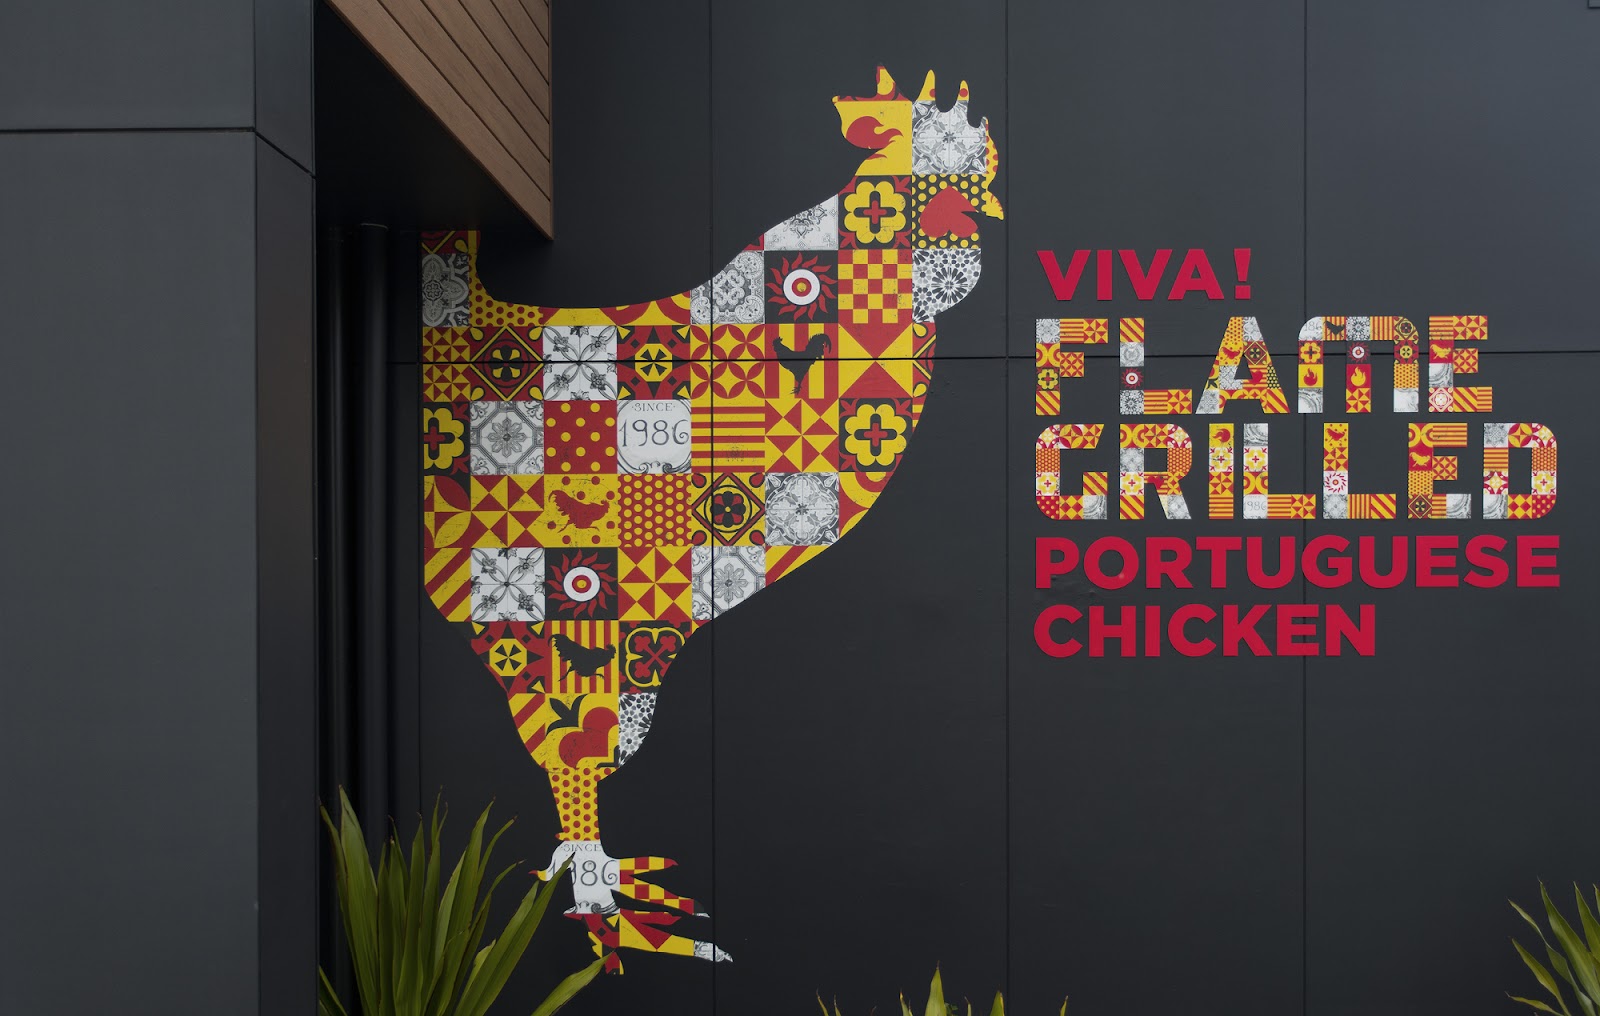 The refreshed Oporto identity features authentic Portuguese tiles and language to reinforce their heritage, with images of chickens throughout to showcase their specialty cuisine. 